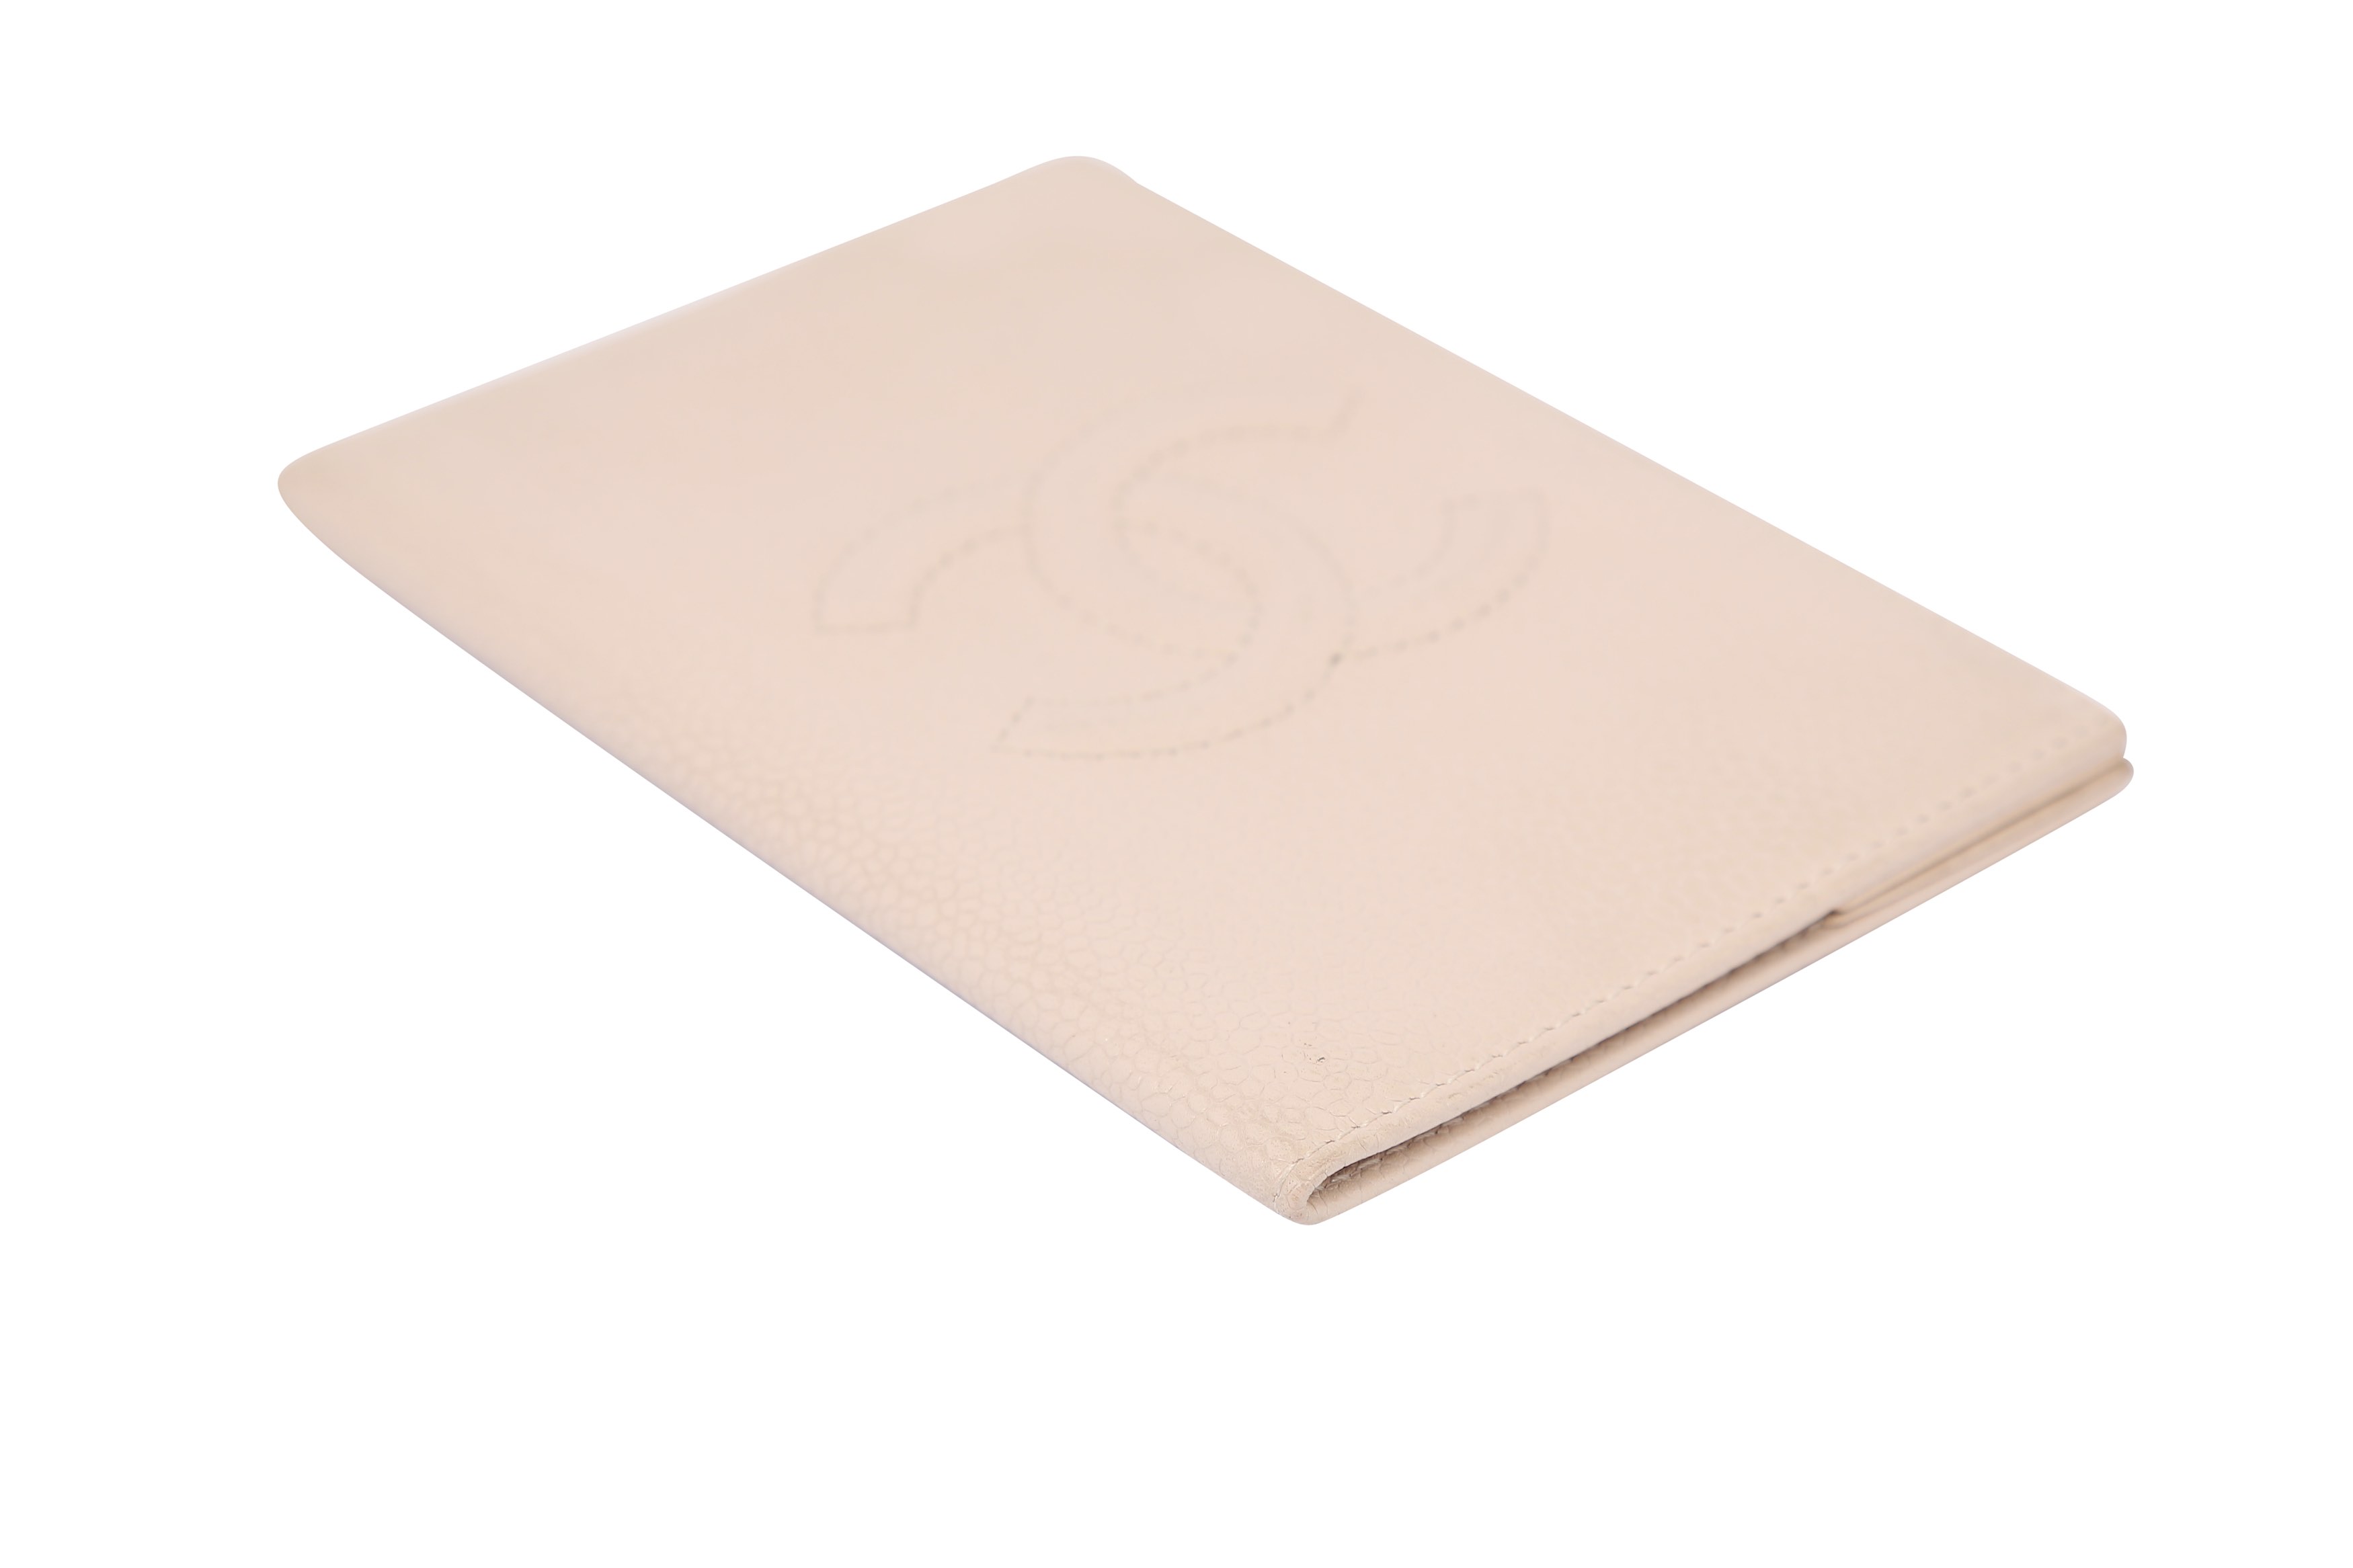 Sold at Auction: Chanel Pale Pink CC Logo Passport Holder